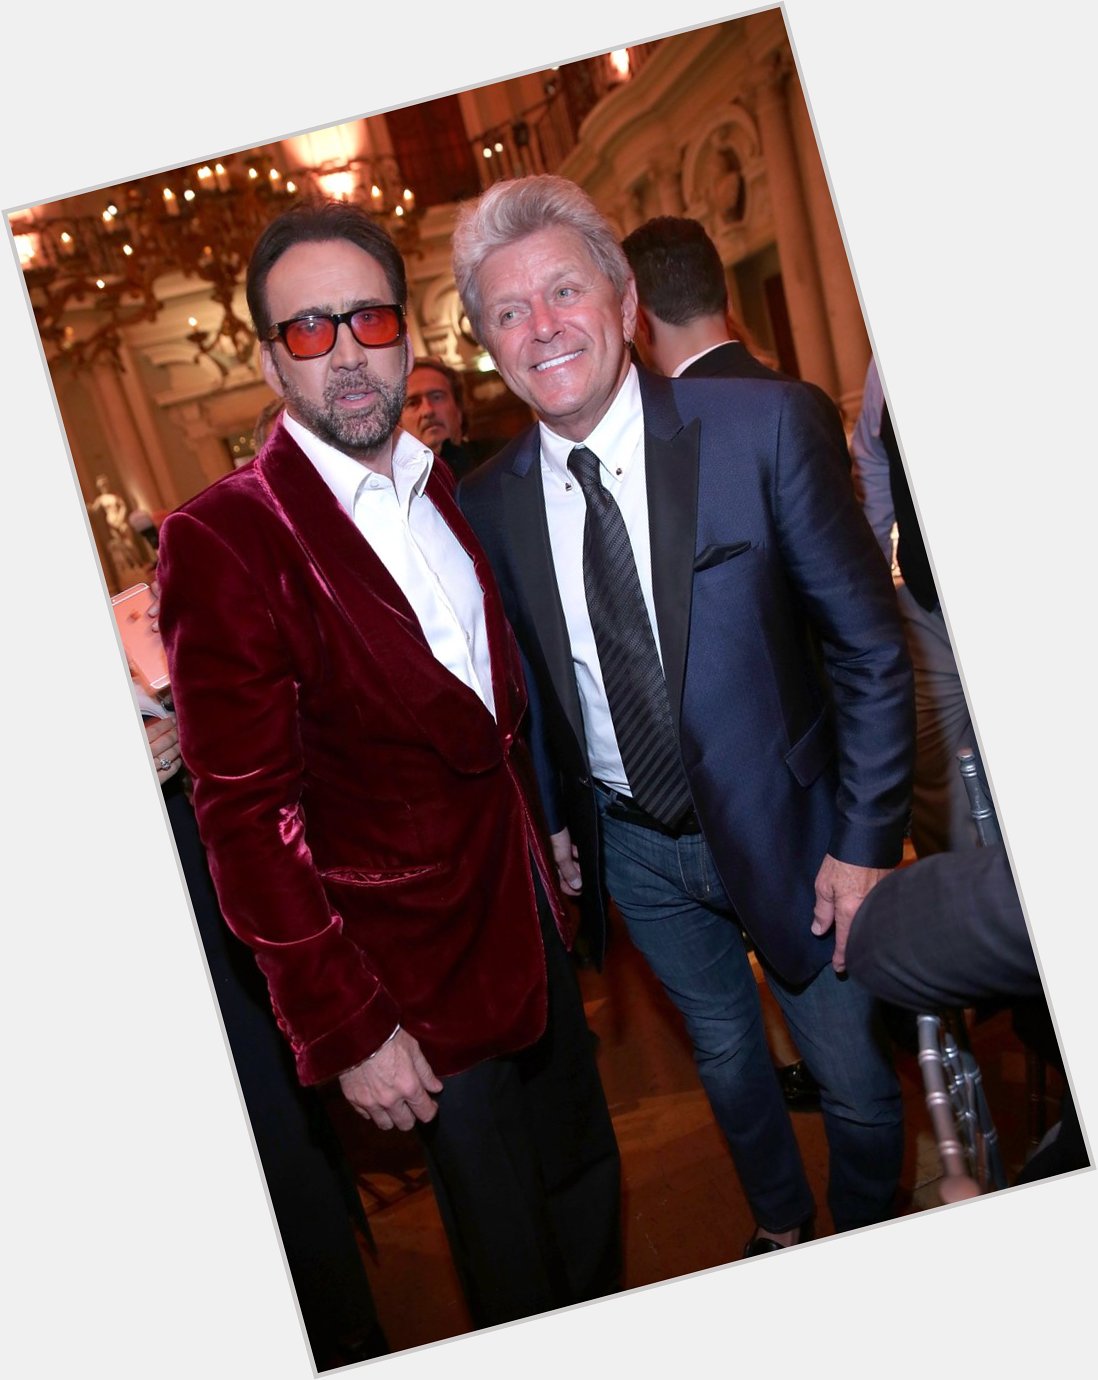 Happy birthday Peter Cetera! And thank you for giving us a sweet excuse to post this picture of you and Nic Cage!! 